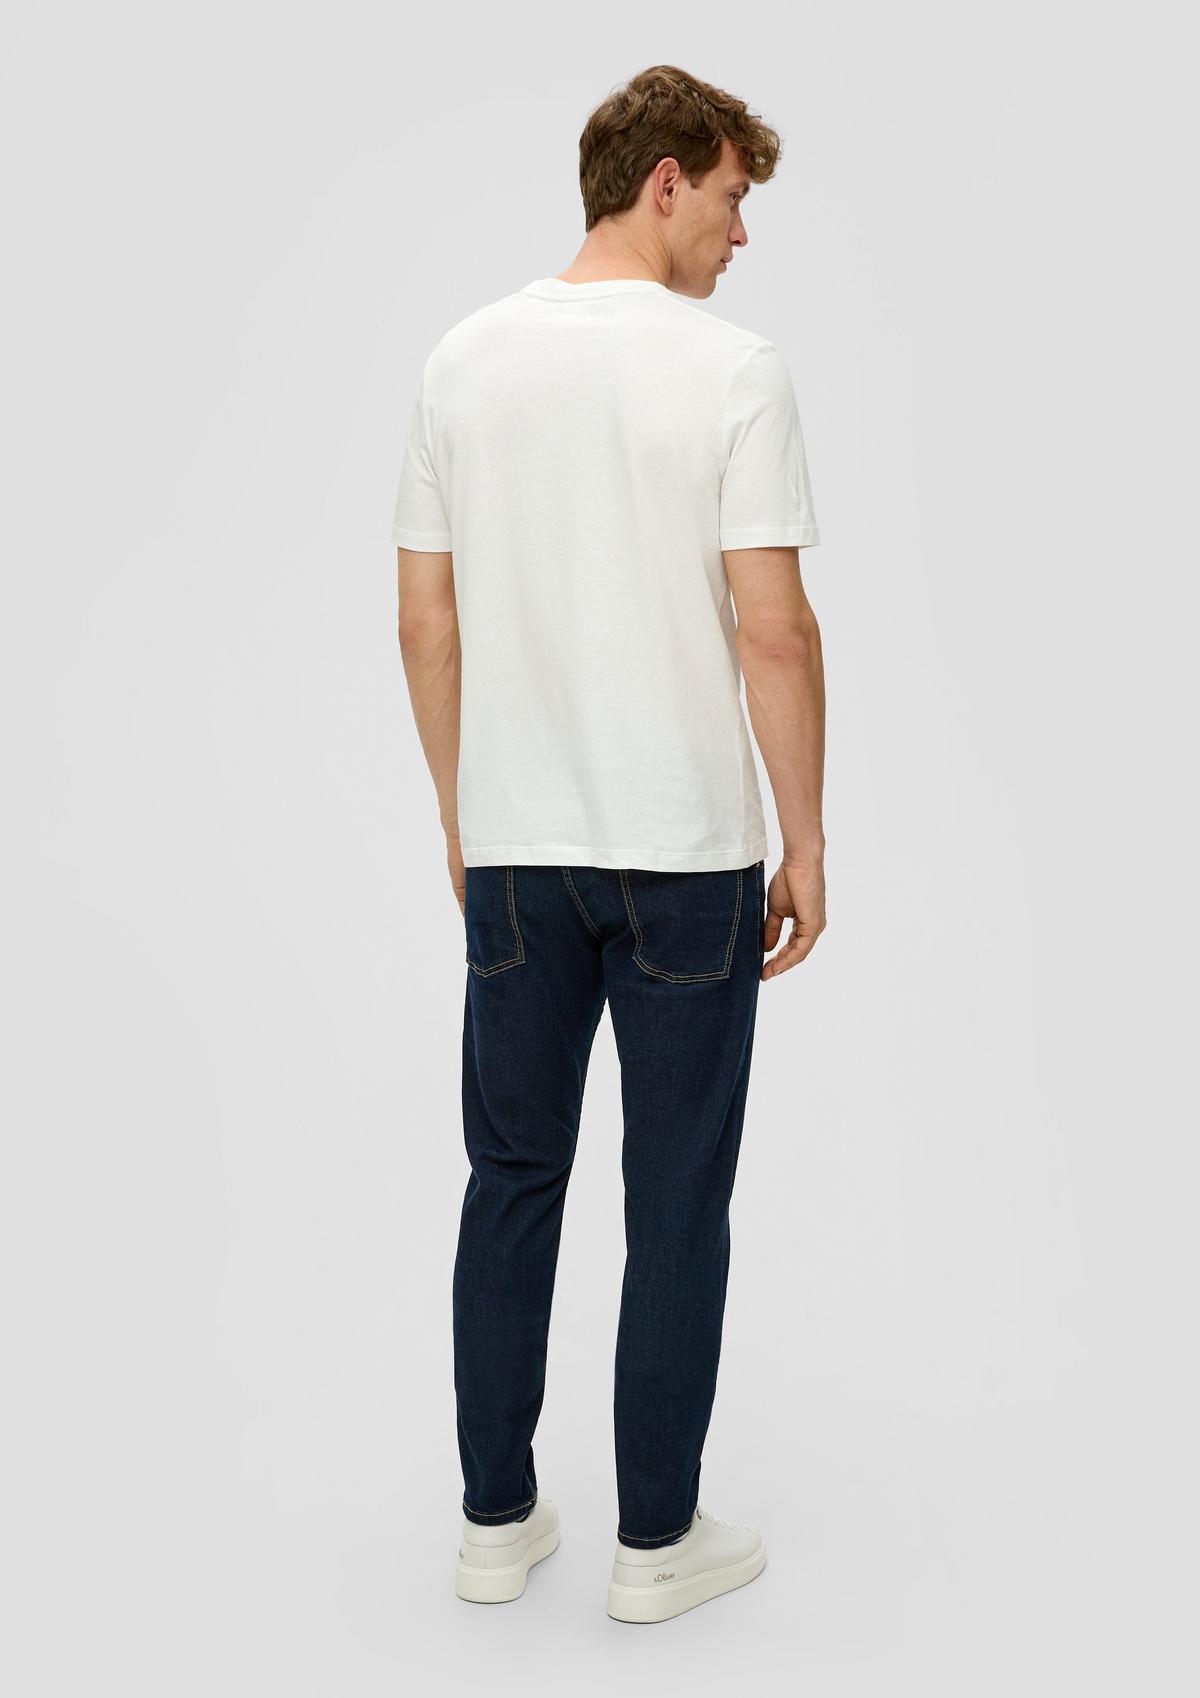 s.Oliver Keith jeans / slim fit / mid rise / straight leg